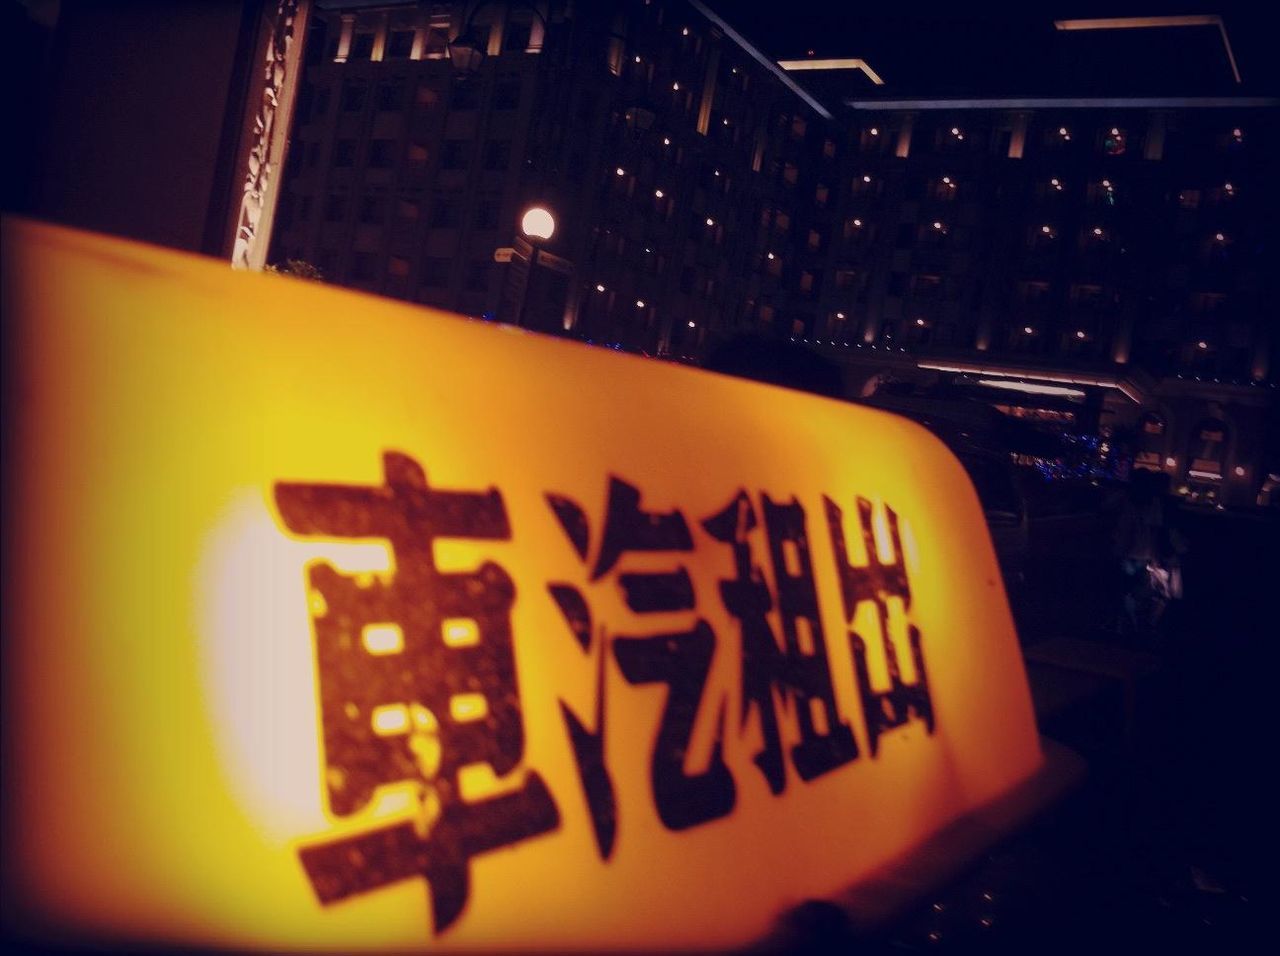 illuminated, text, western script, night, communication, indoors, yellow, non-western script, capital letter, information sign, lighting equipment, close-up, information, sign, no people, focus on foreground, selective focus, light - natural phenomenon, hanging, guidance